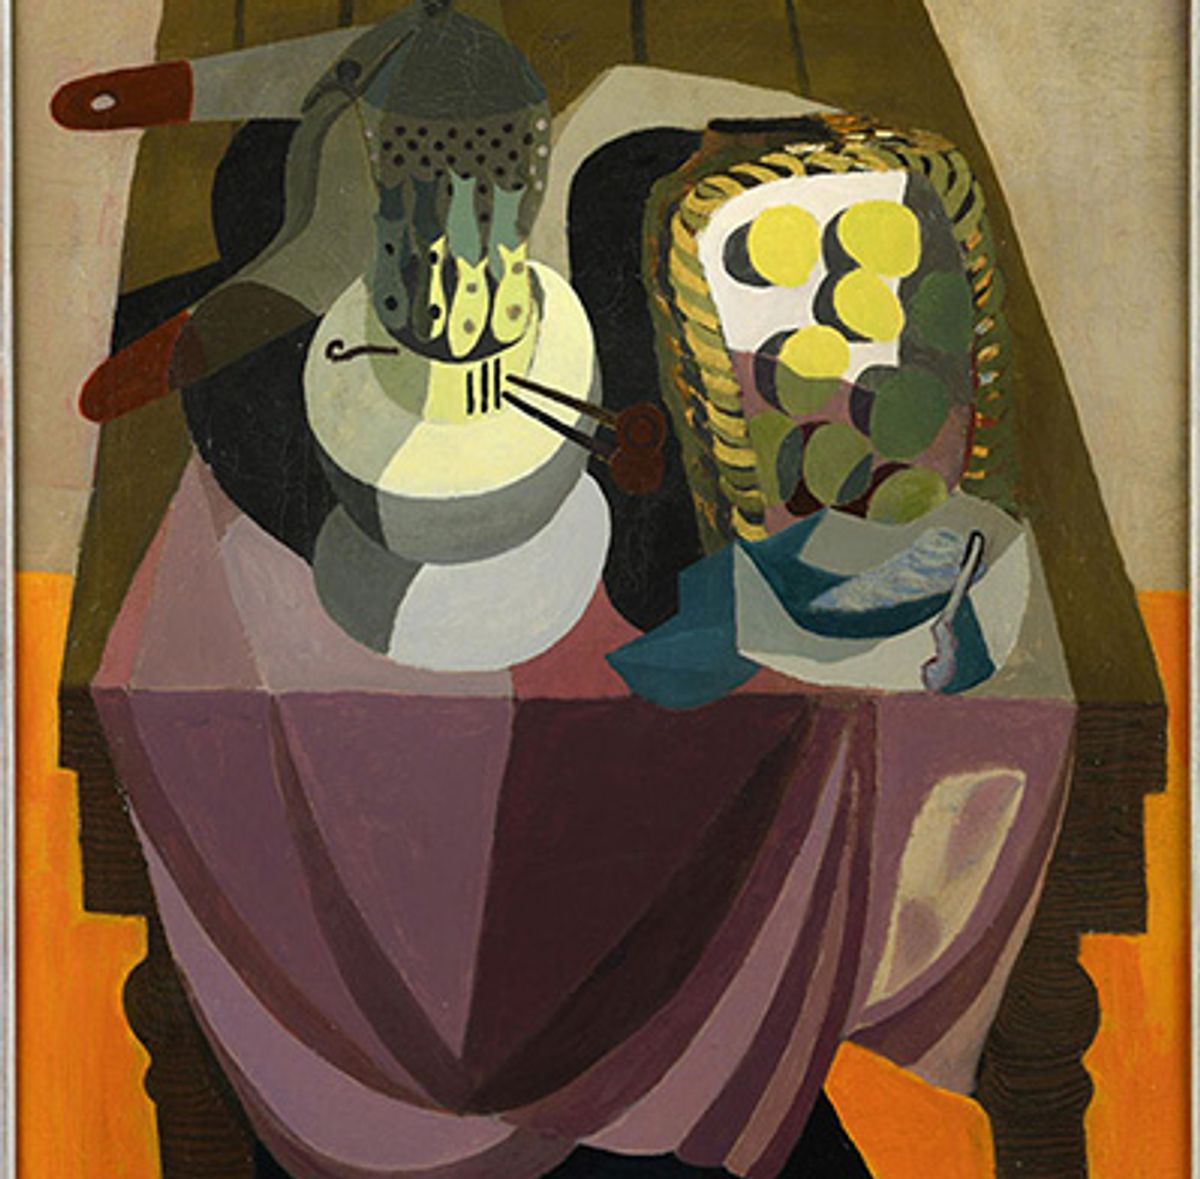 Robert MacBryde's Still Life has an estimate of £7,000 - £10,000. Courtesy of Cheffins